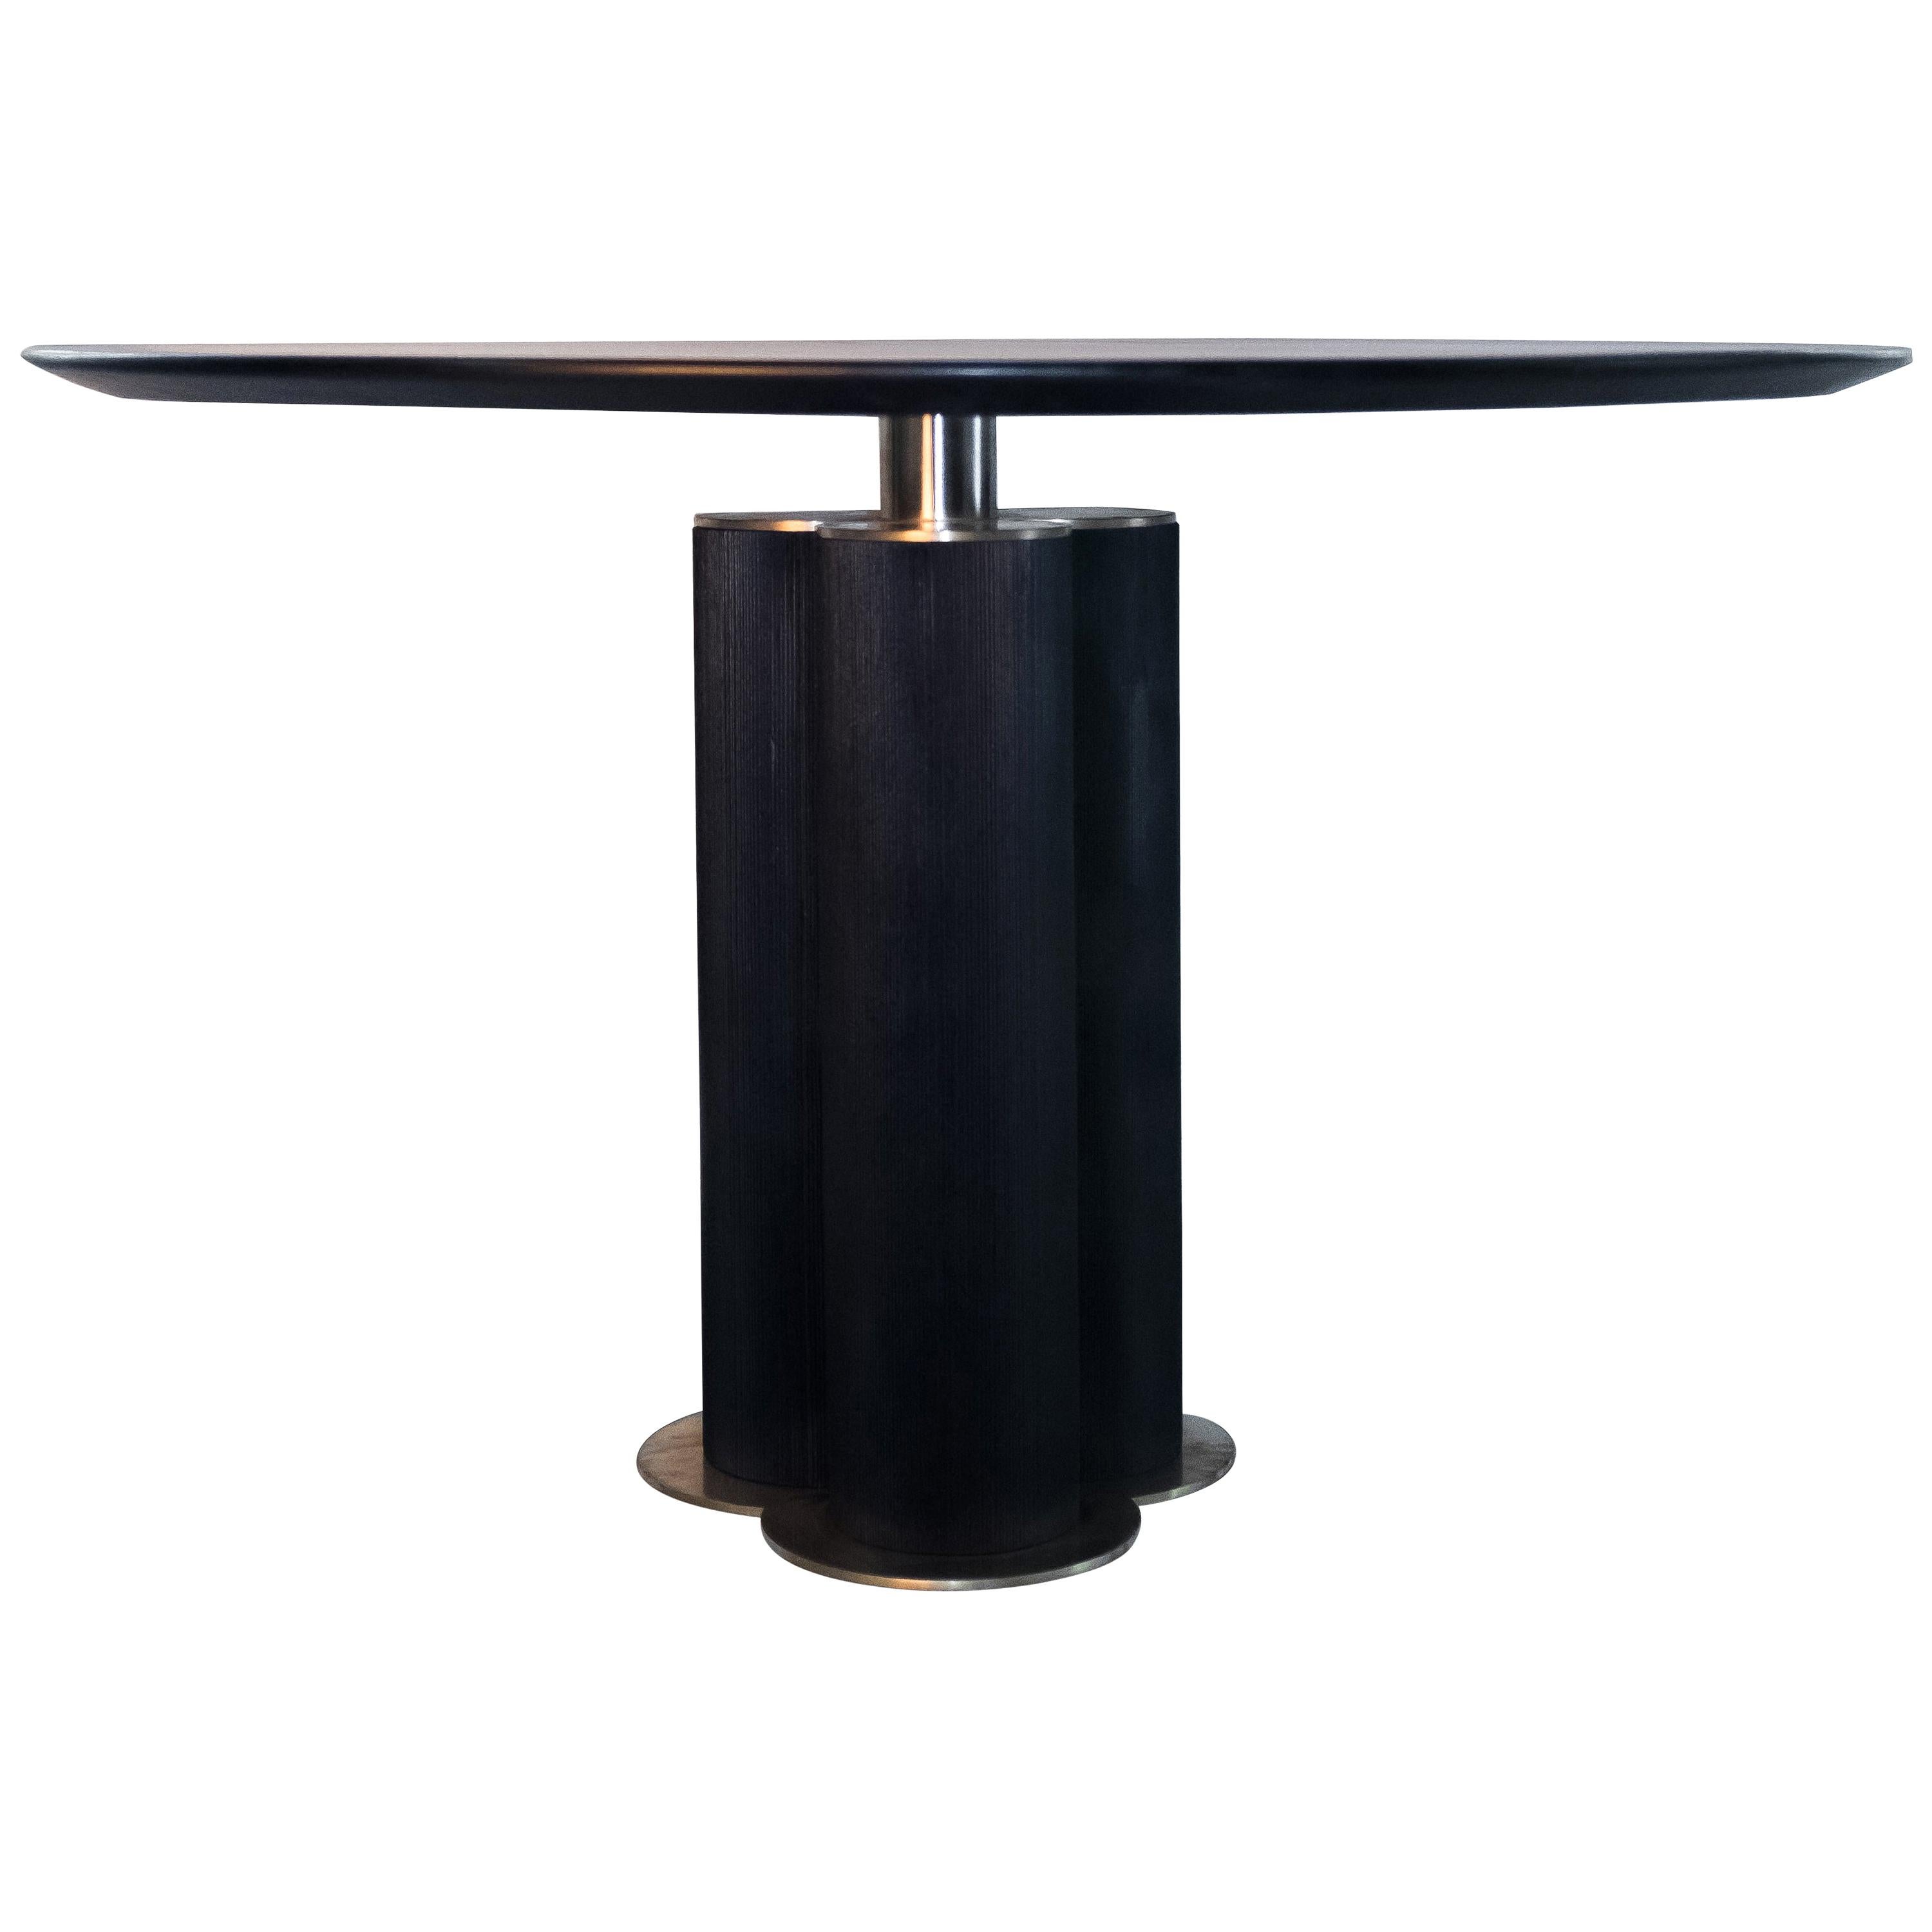 Cinta Wood Top and Textured Wood Legs Table by ATRA For Sale